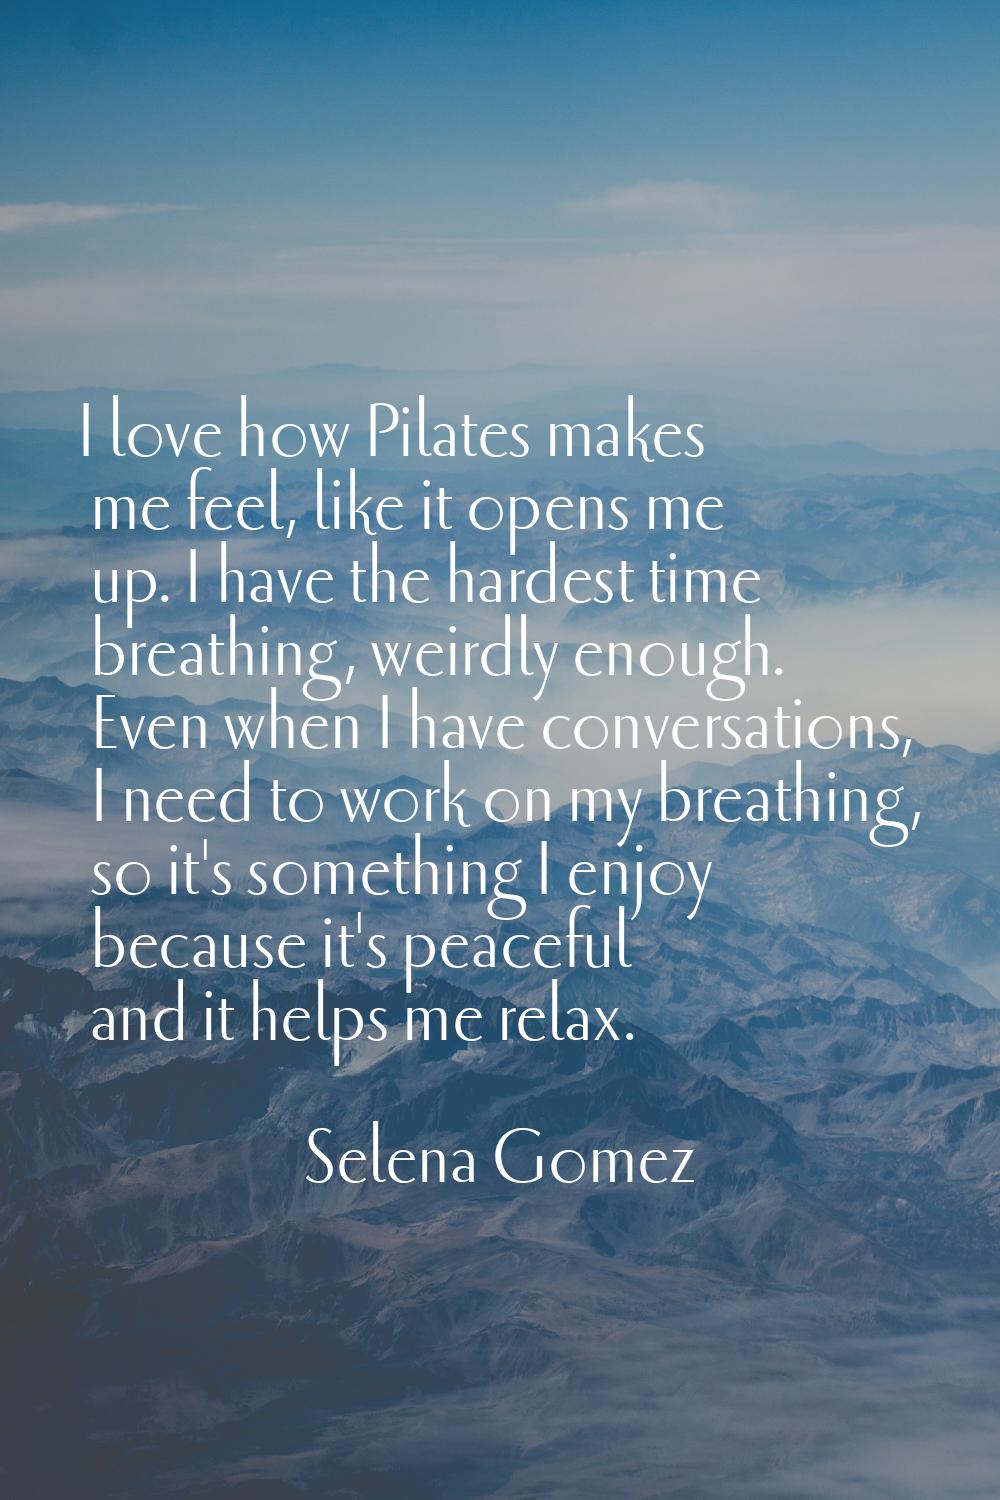 I love how Pilates makes me feel, like it opens me up. I have the hardest time breathing, weirdly e